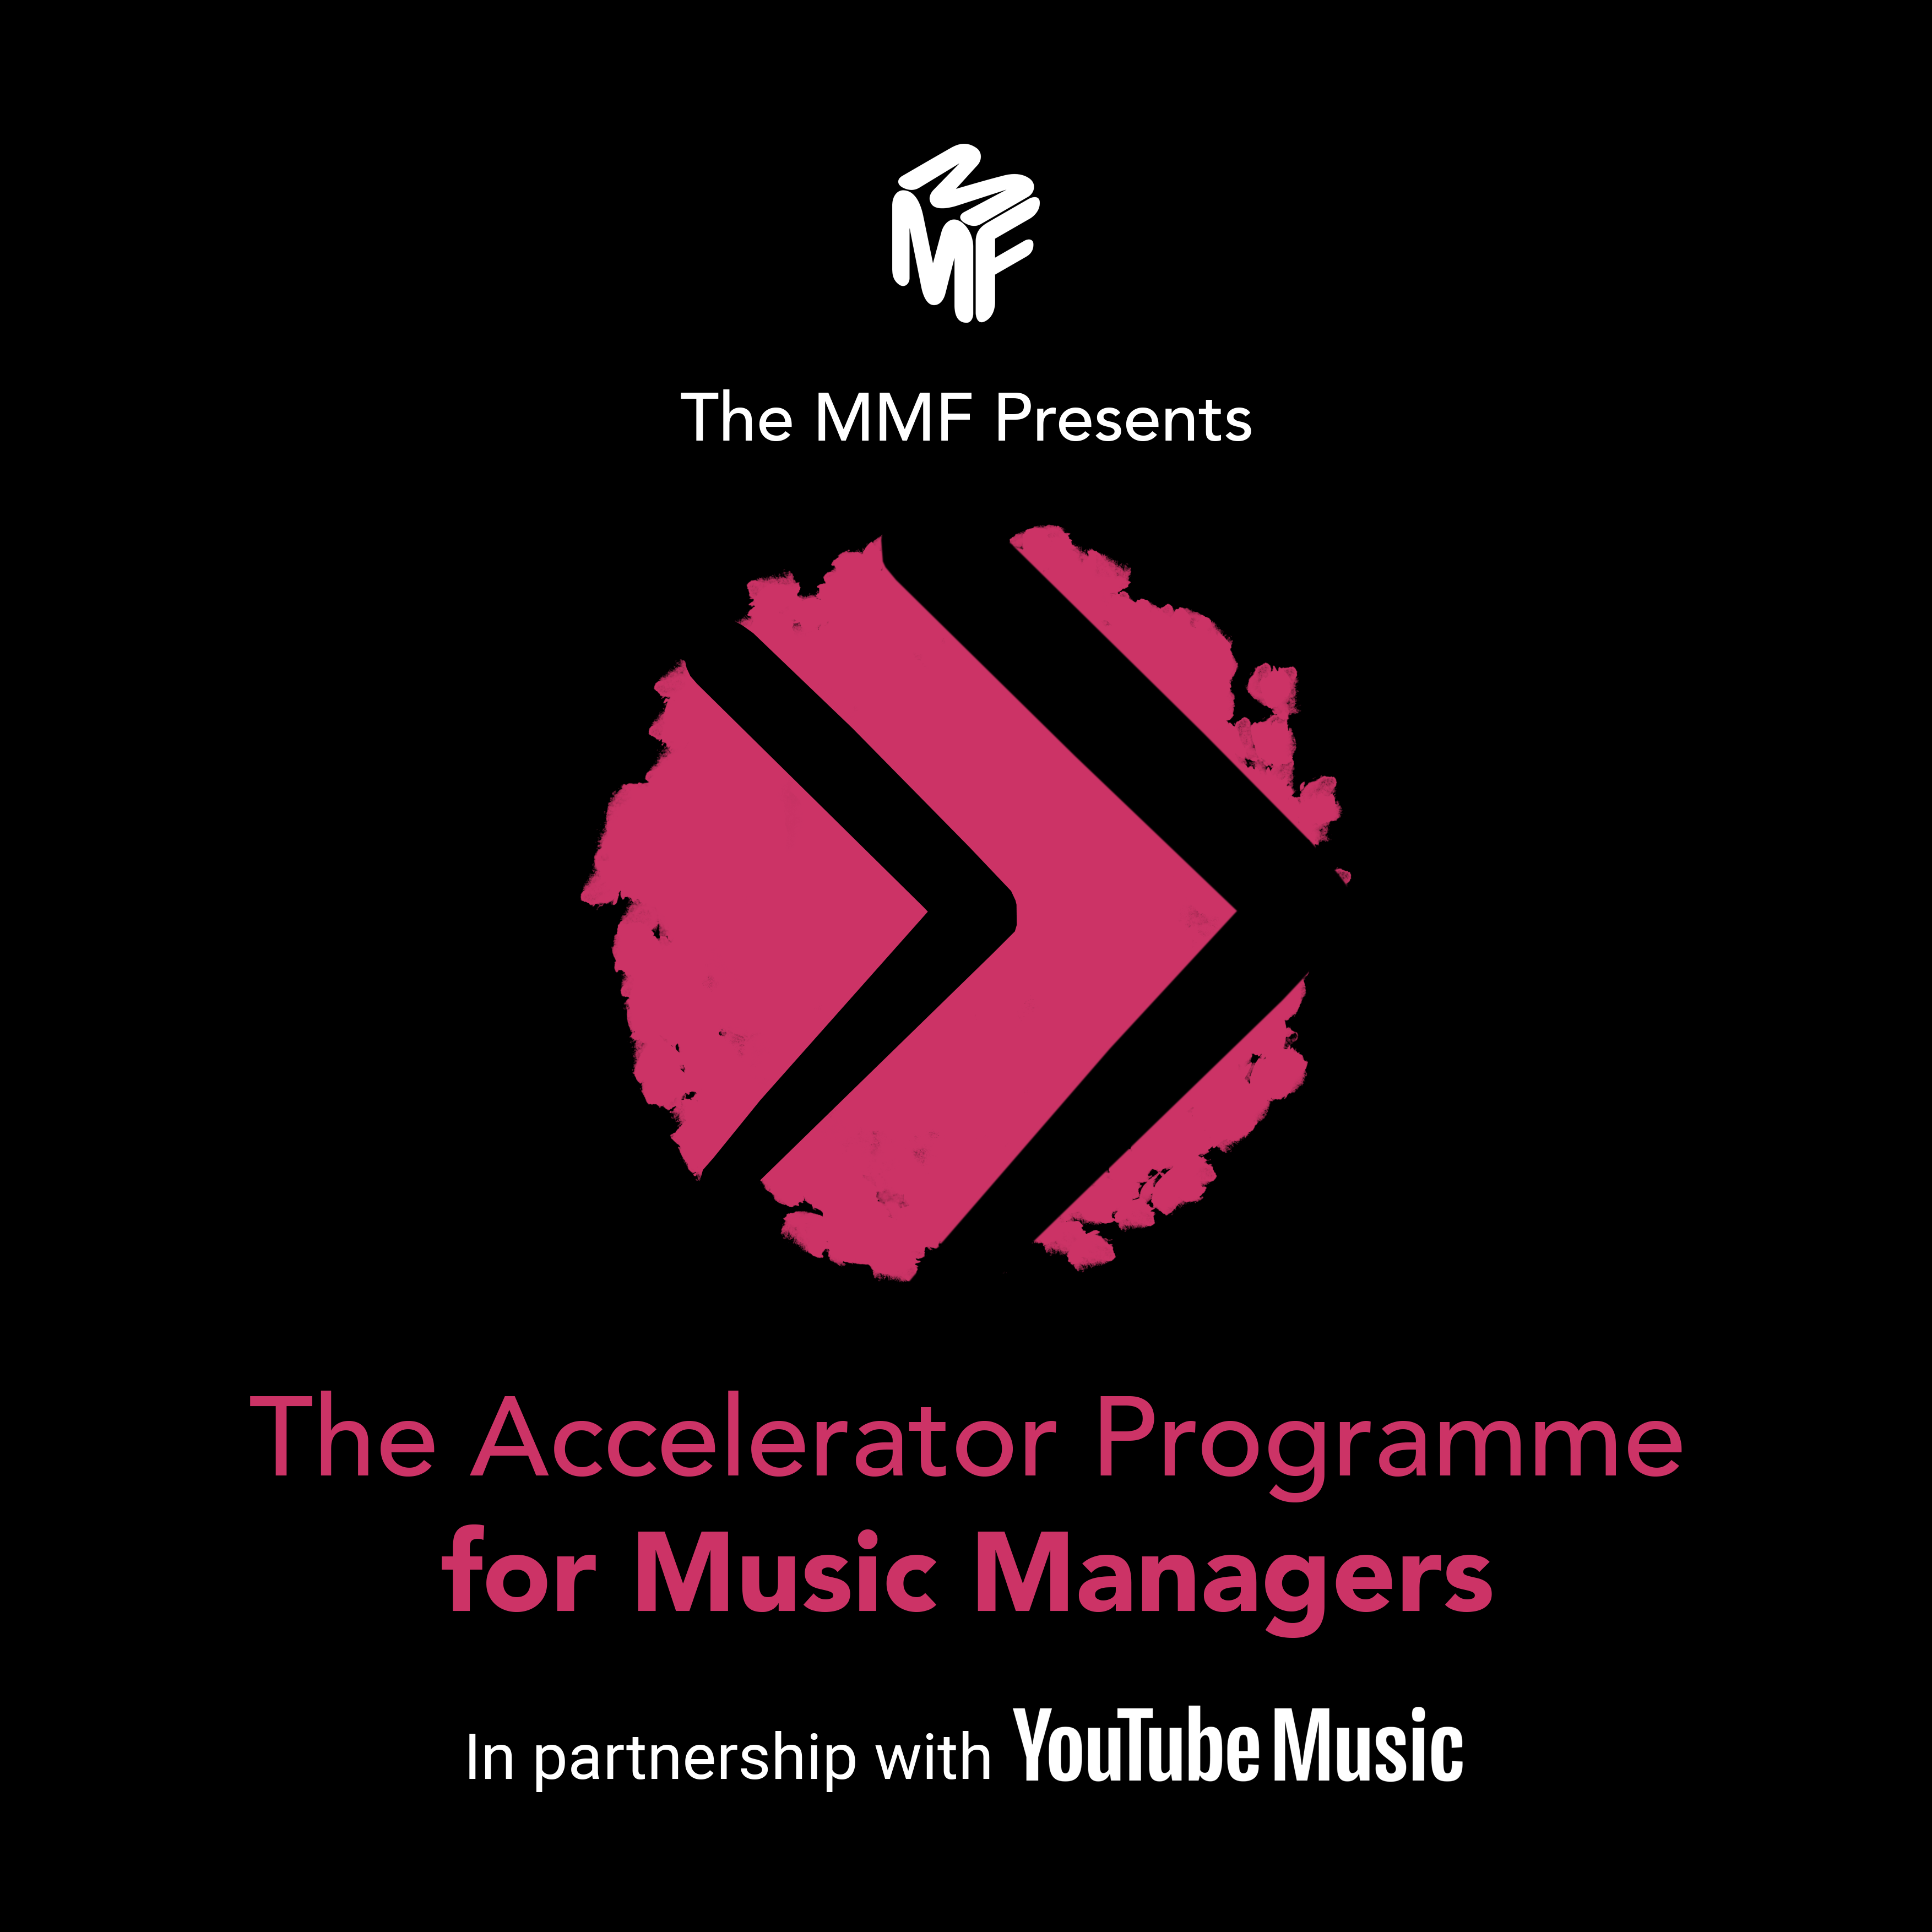 MMF launches Accelerator Programme for Music Managers in partnership with YouTube Music and Scottish Music Industry Association (SMIA)